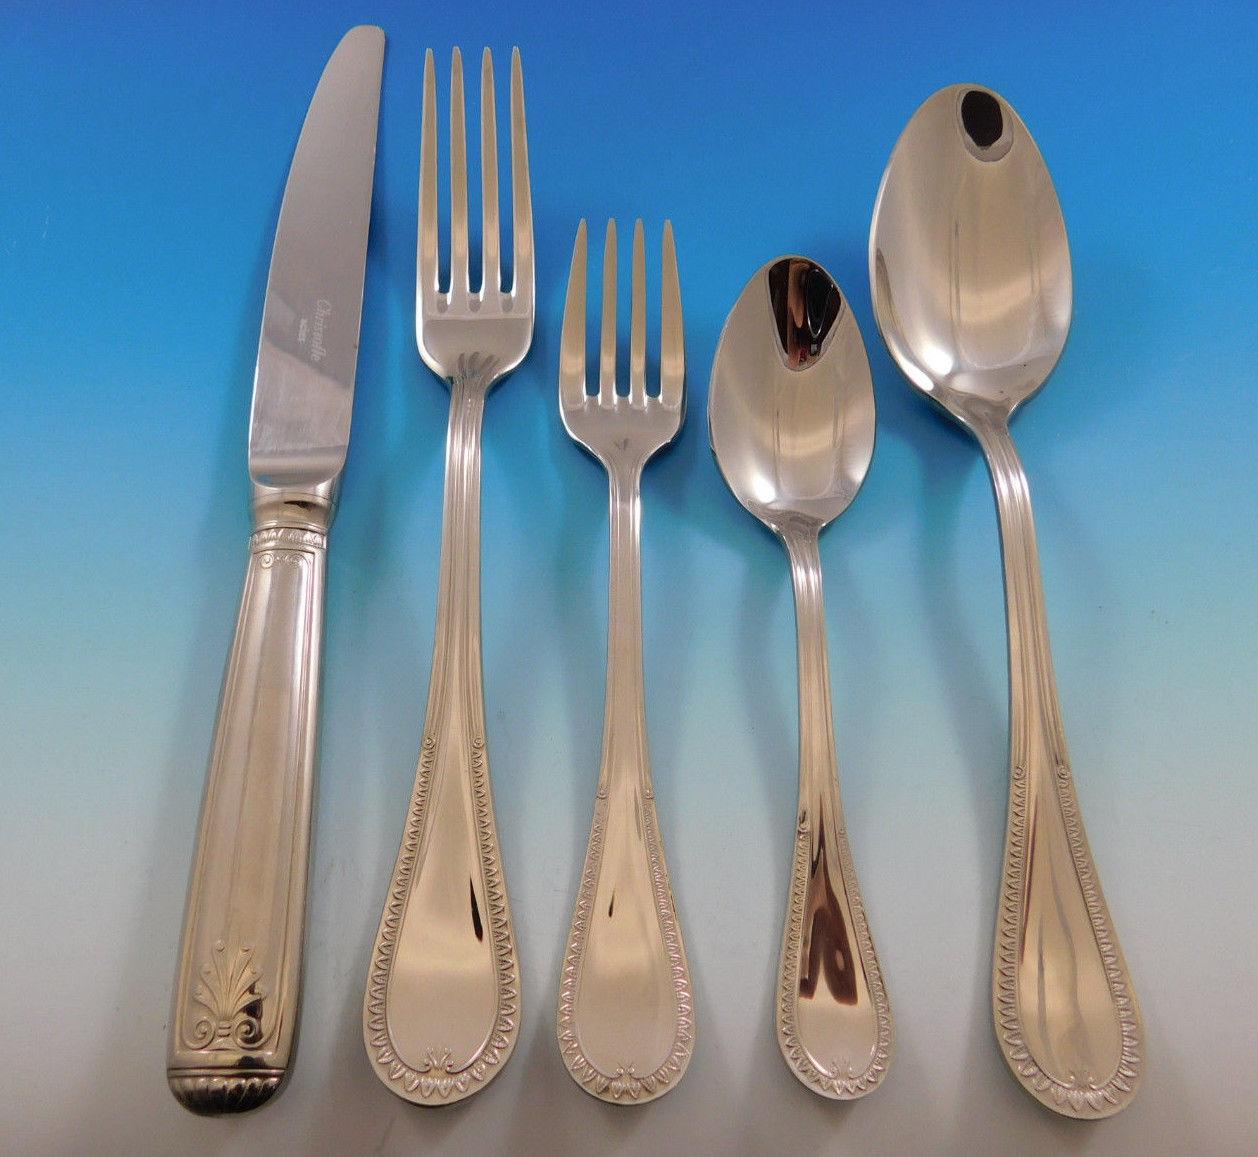 Discontinued and hard to find Beauharnais by Christofle stainless steel flatware set in original Christofle box - 39 pieces. This set appears virtually unused and includes:

Eight dinner size knives, 9 3/4